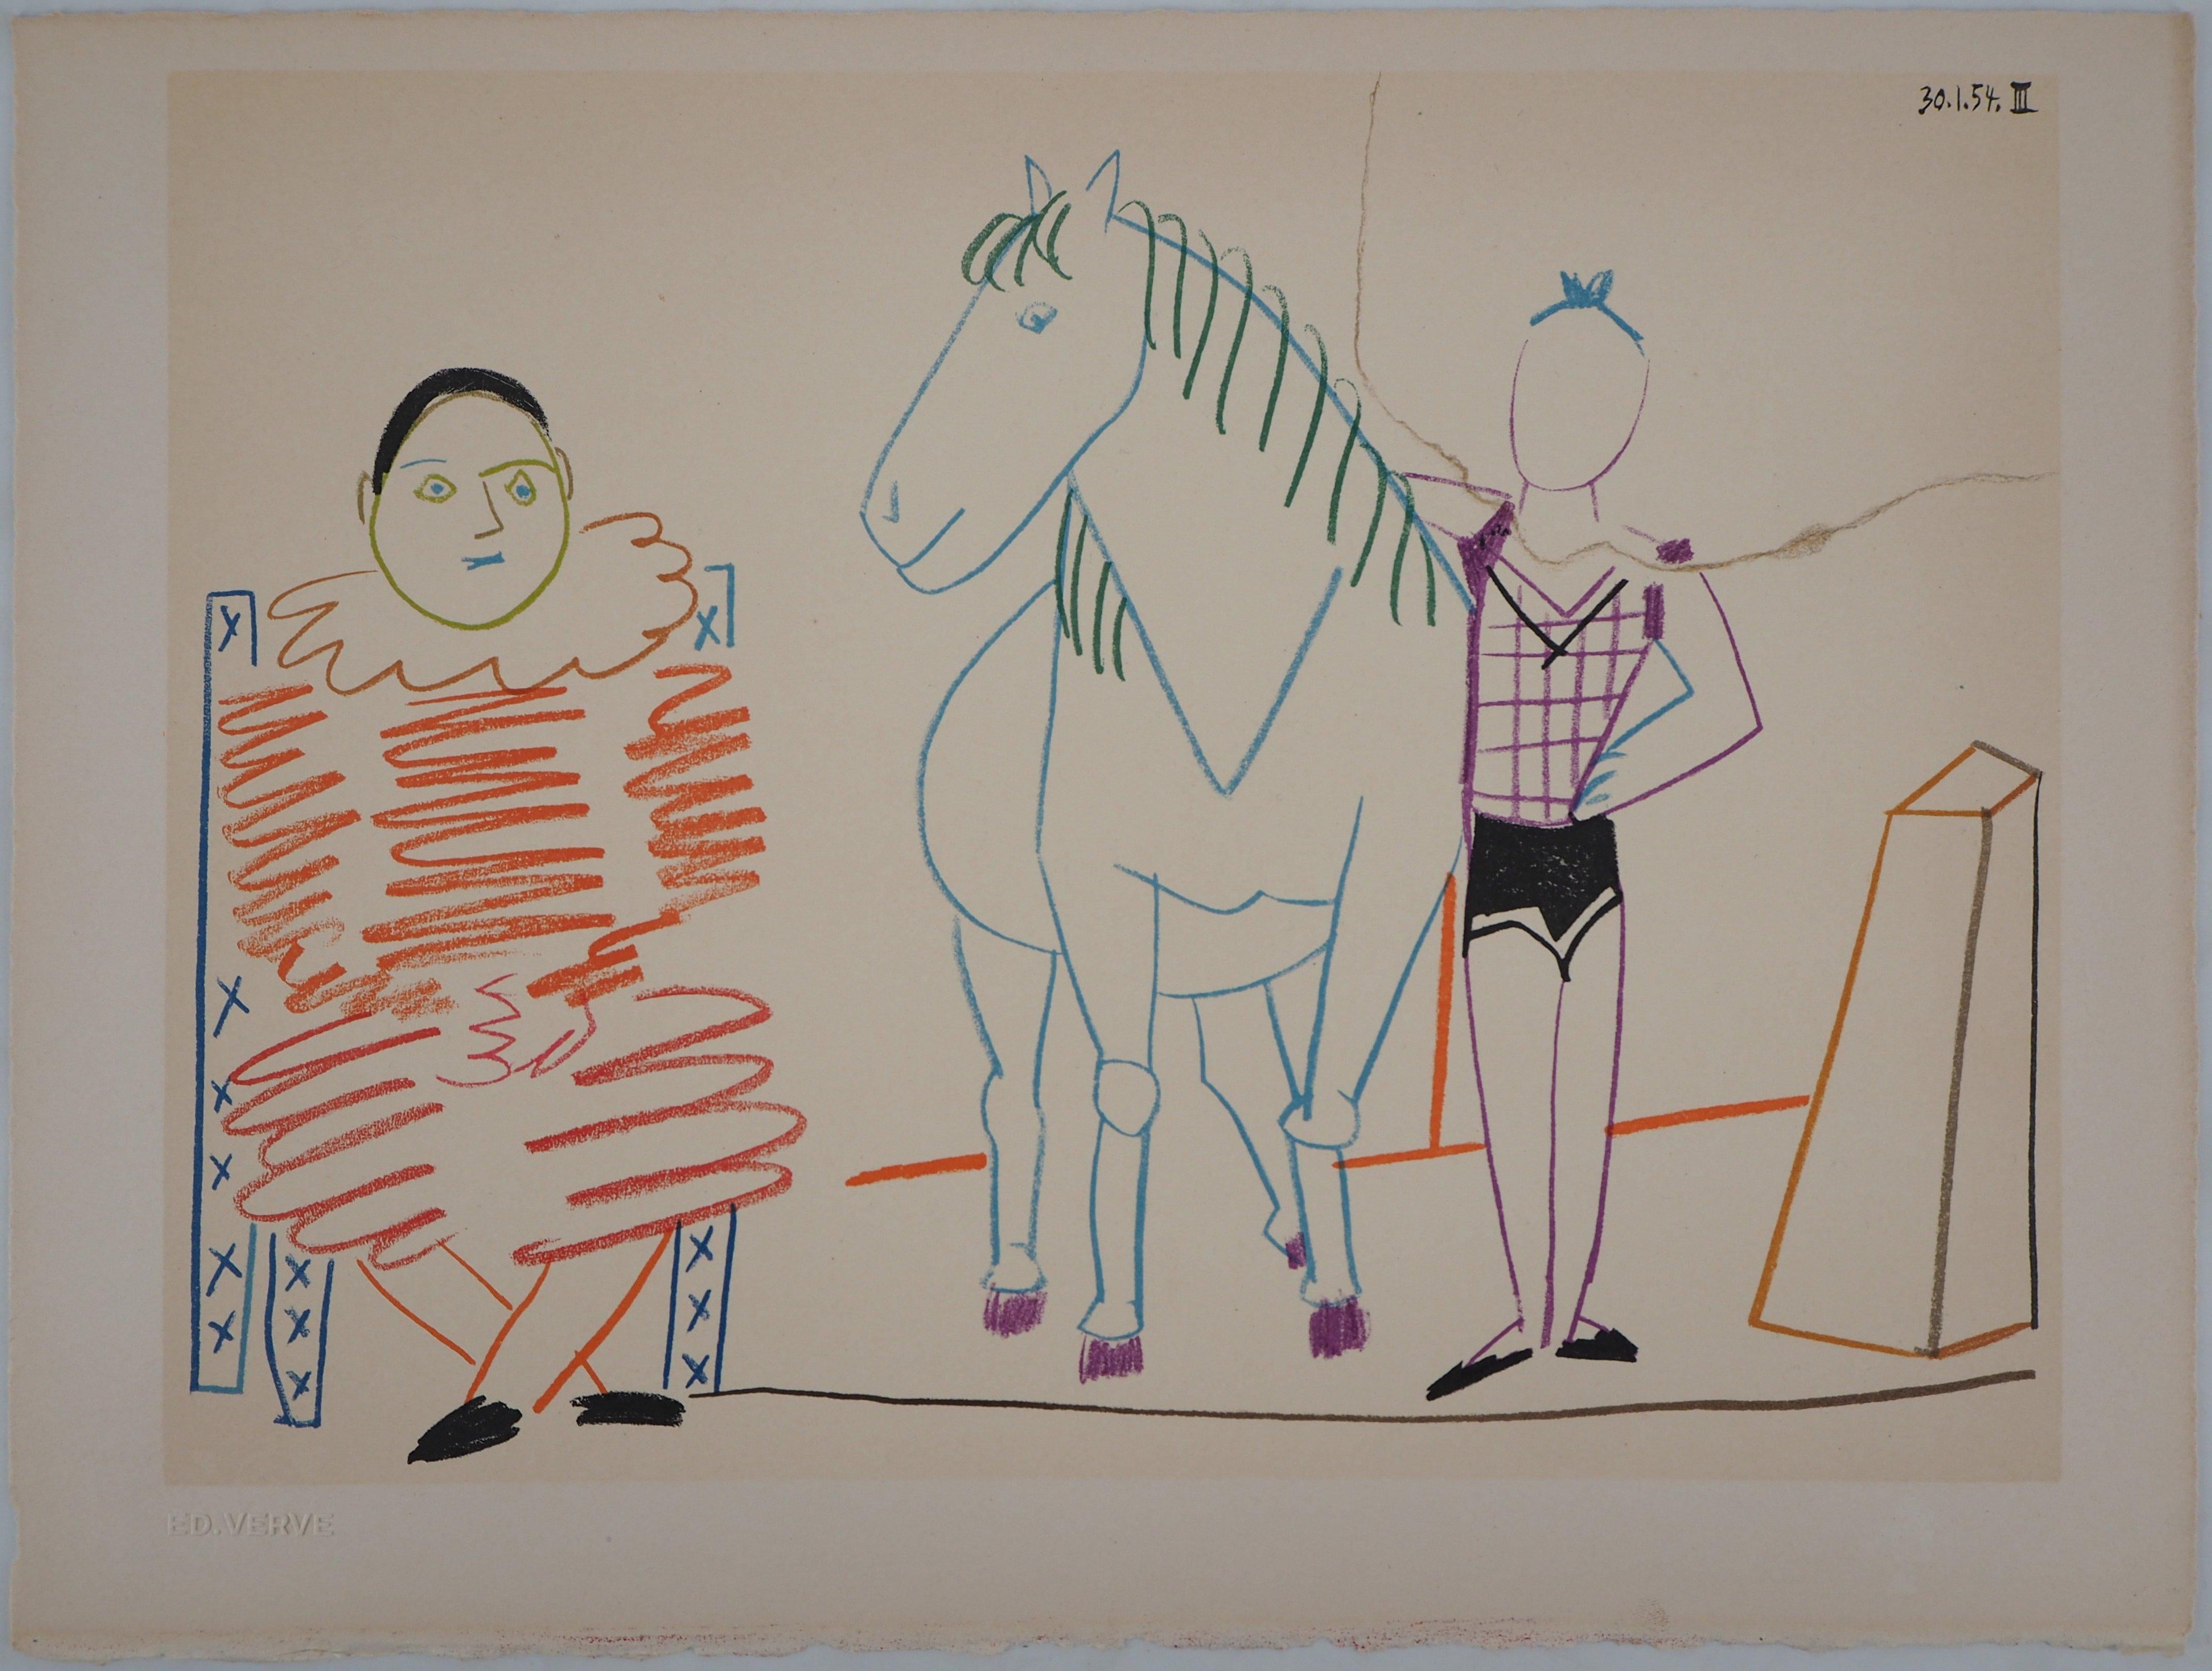 The Horse and the Clown - Litograph On Arches Vellum - Verve, Mourlot  - Print by (after) Pablo Picasso